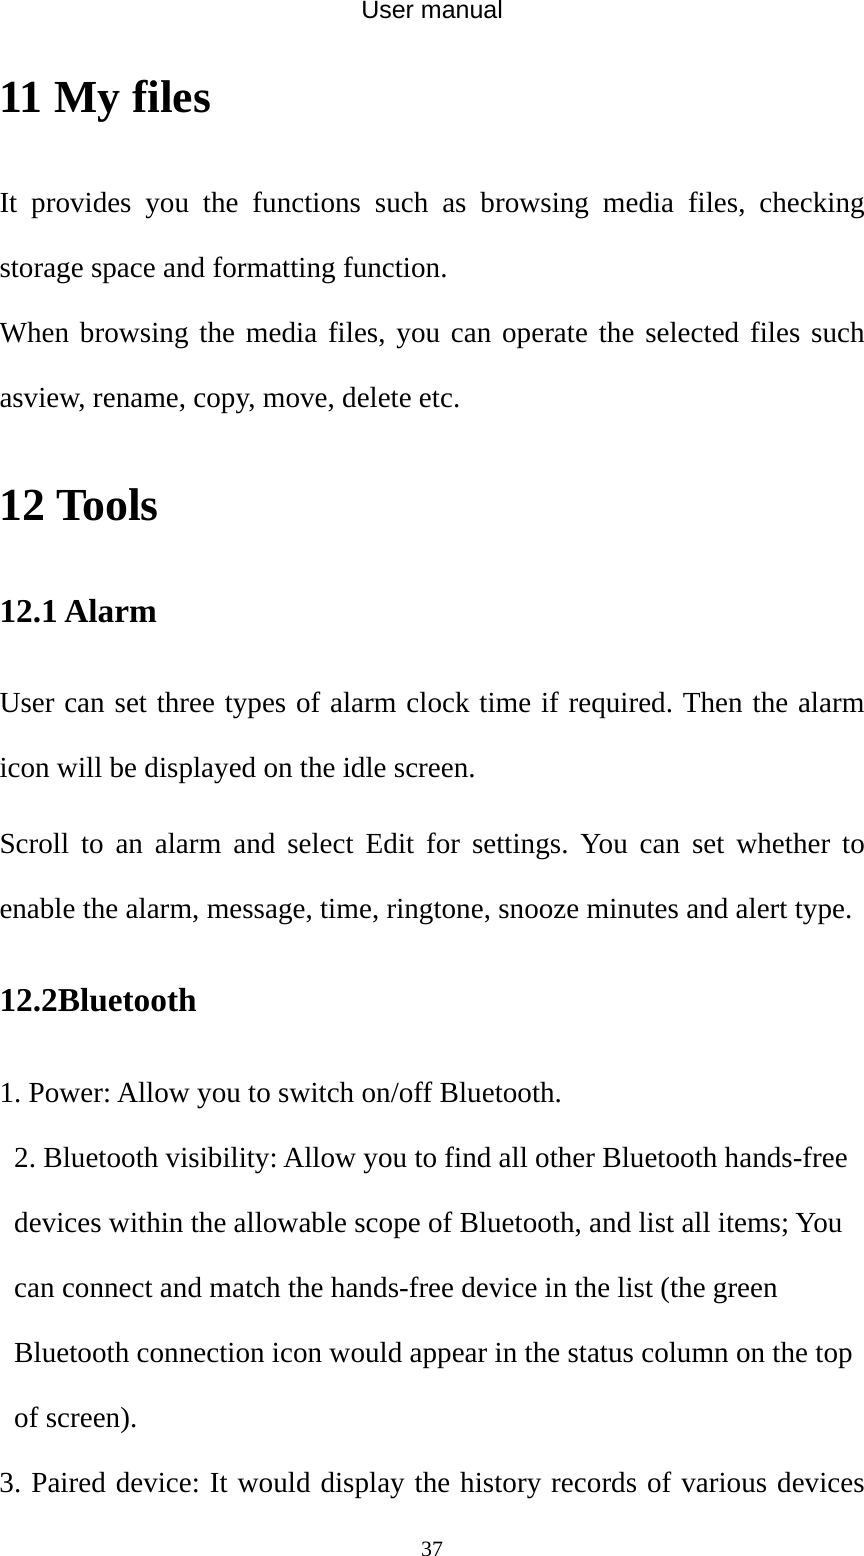 User manual  3711 My files It provides you the functions such as browsing media files, checking storage space and formatting function. When browsing the media files, you can operate the selected files such asview, rename, copy, move, delete etc. 12 Tools 12.1 Alarm User can set three types of alarm clock time if required. Then the alarm icon will be displayed on the idle screen. Scroll to an alarm and select Edit for settings. You can set whether to enable the alarm, message, time, ringtone, snooze minutes and alert type. 12.2Bluetooth 1. Power: Allow you to switch on/off Bluetooth.   2. Bluetooth visibility: Allow you to find all other Bluetooth hands-free devices within the allowable scope of Bluetooth, and list all items; You can connect and match the hands-free device in the list (the green Bluetooth connection icon would appear in the status column on the top of screen).   3. Paired device: It would display the history records of various devices 